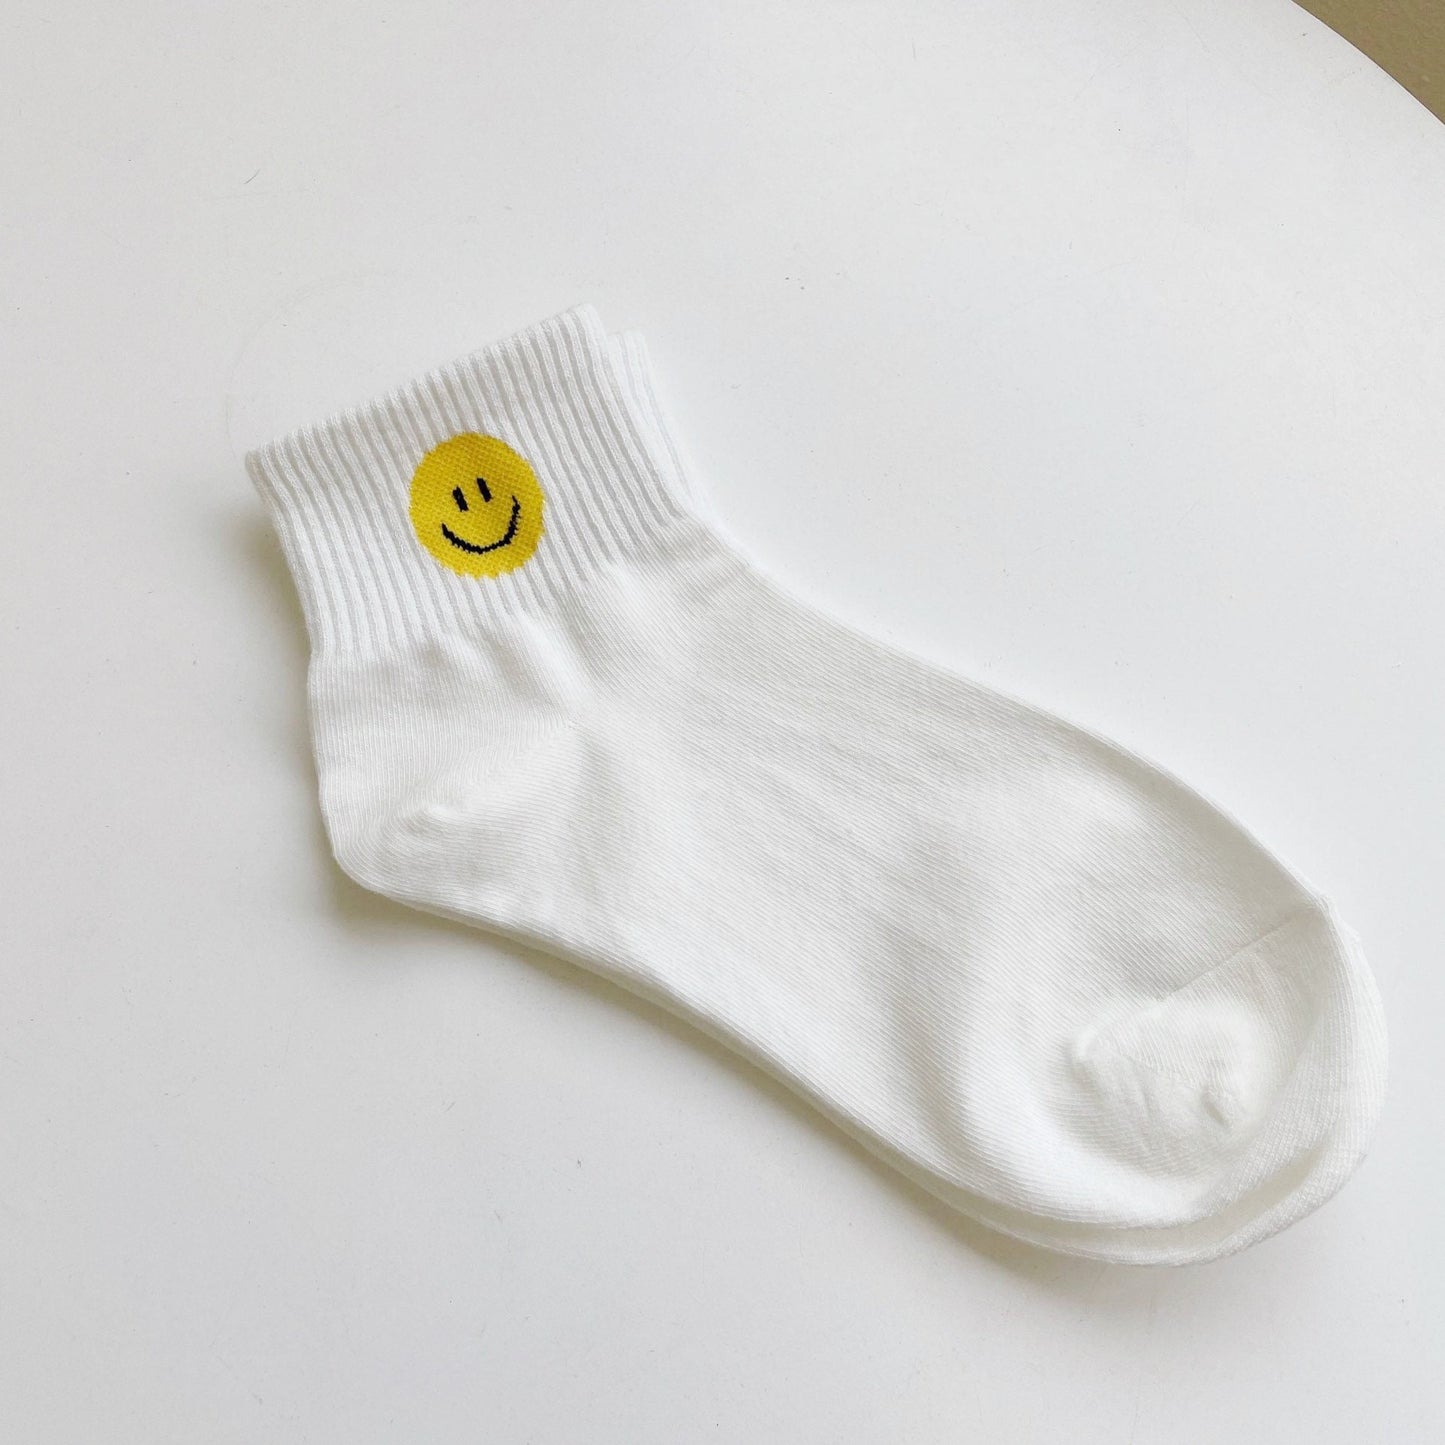 Miss June’s | 1 pair cotton socks｜Daily | Creative | Ankle | Designed | Cute | Gift Idea | Casual | Cool | Comfortable | Women’s